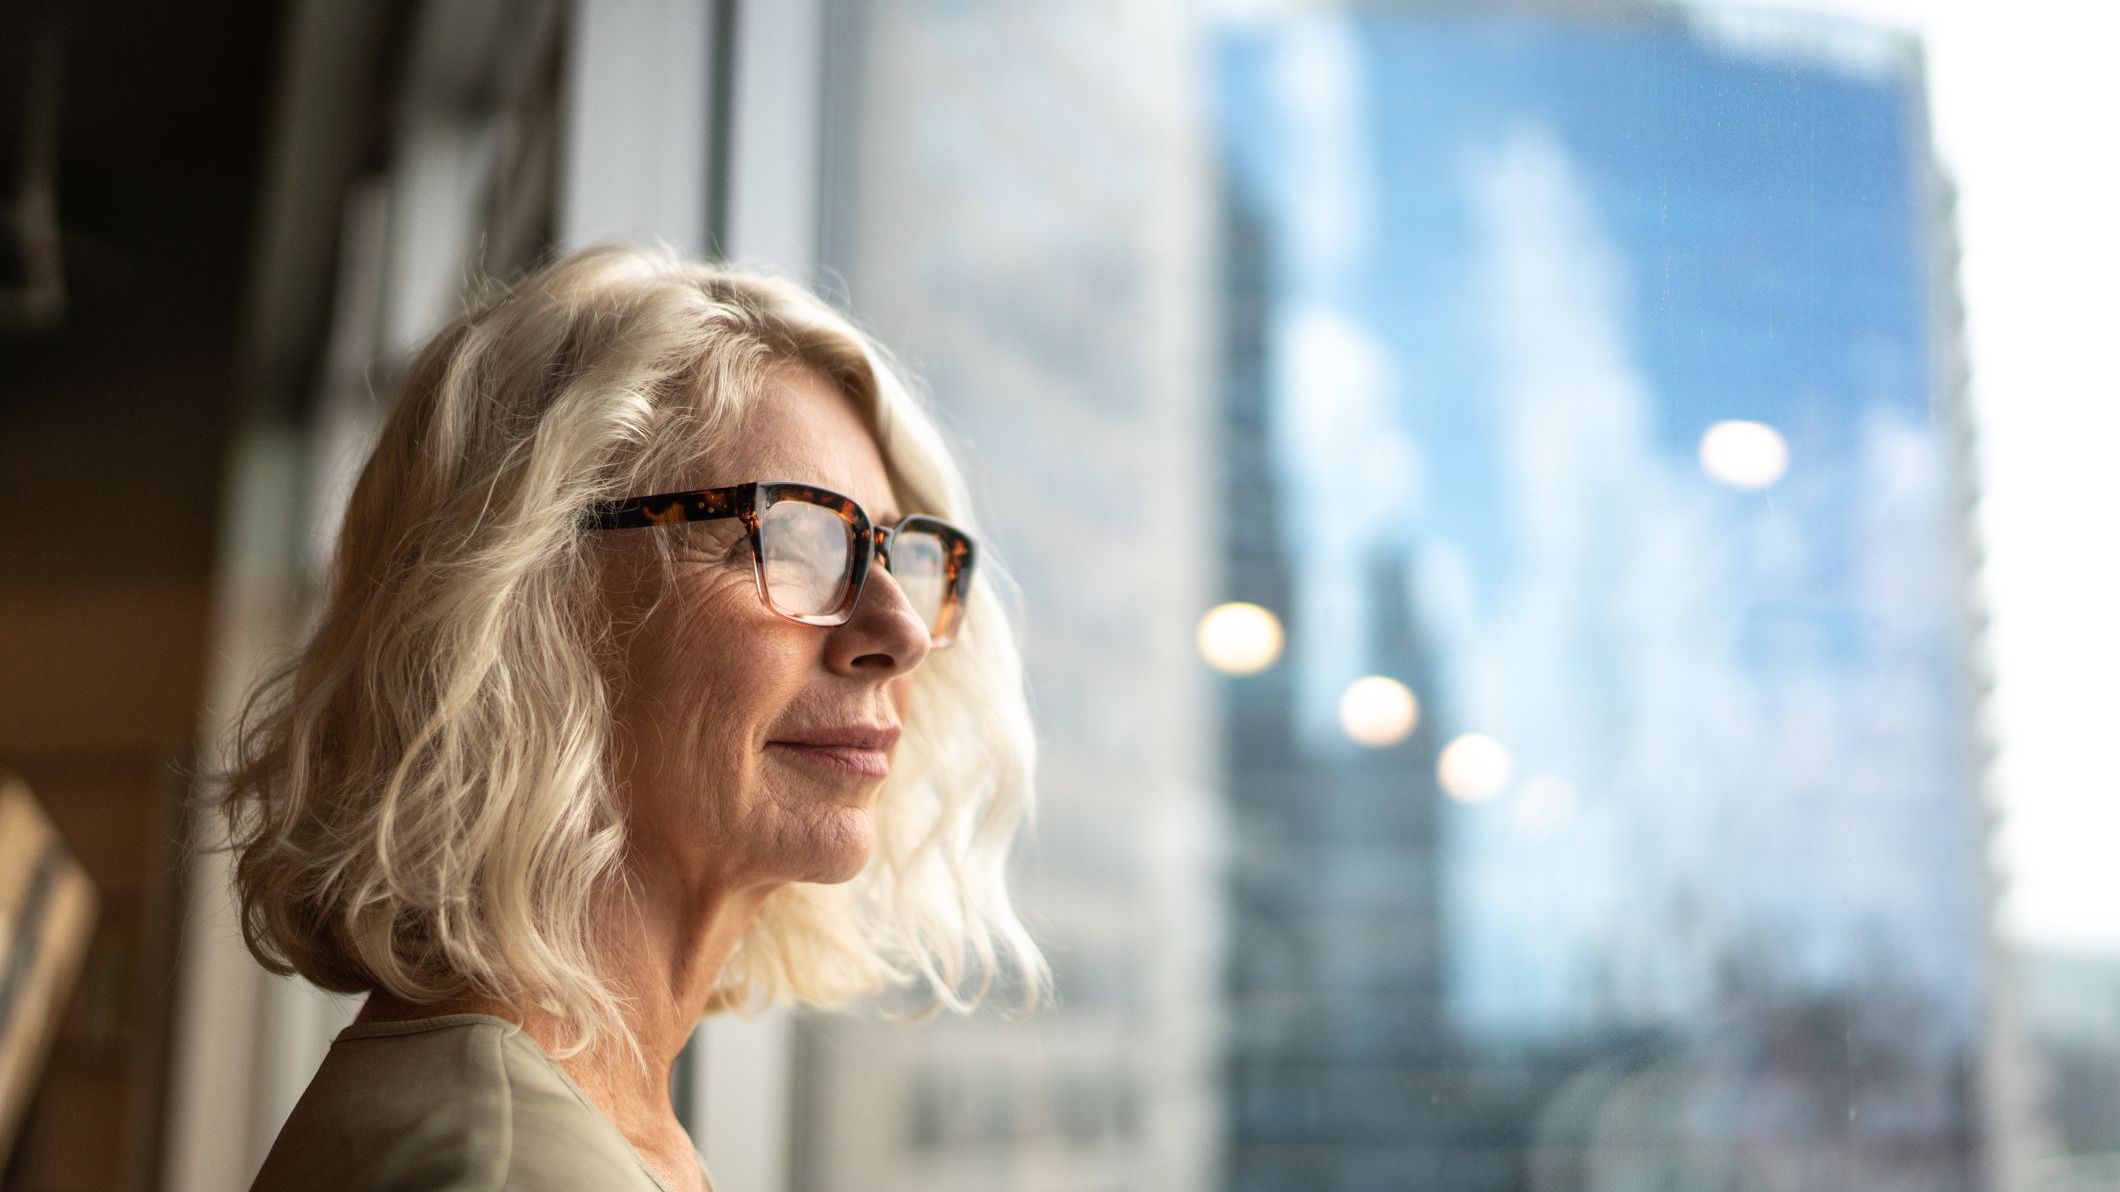 A woman looks out the window of her office as she thinks about her plan for retirement.